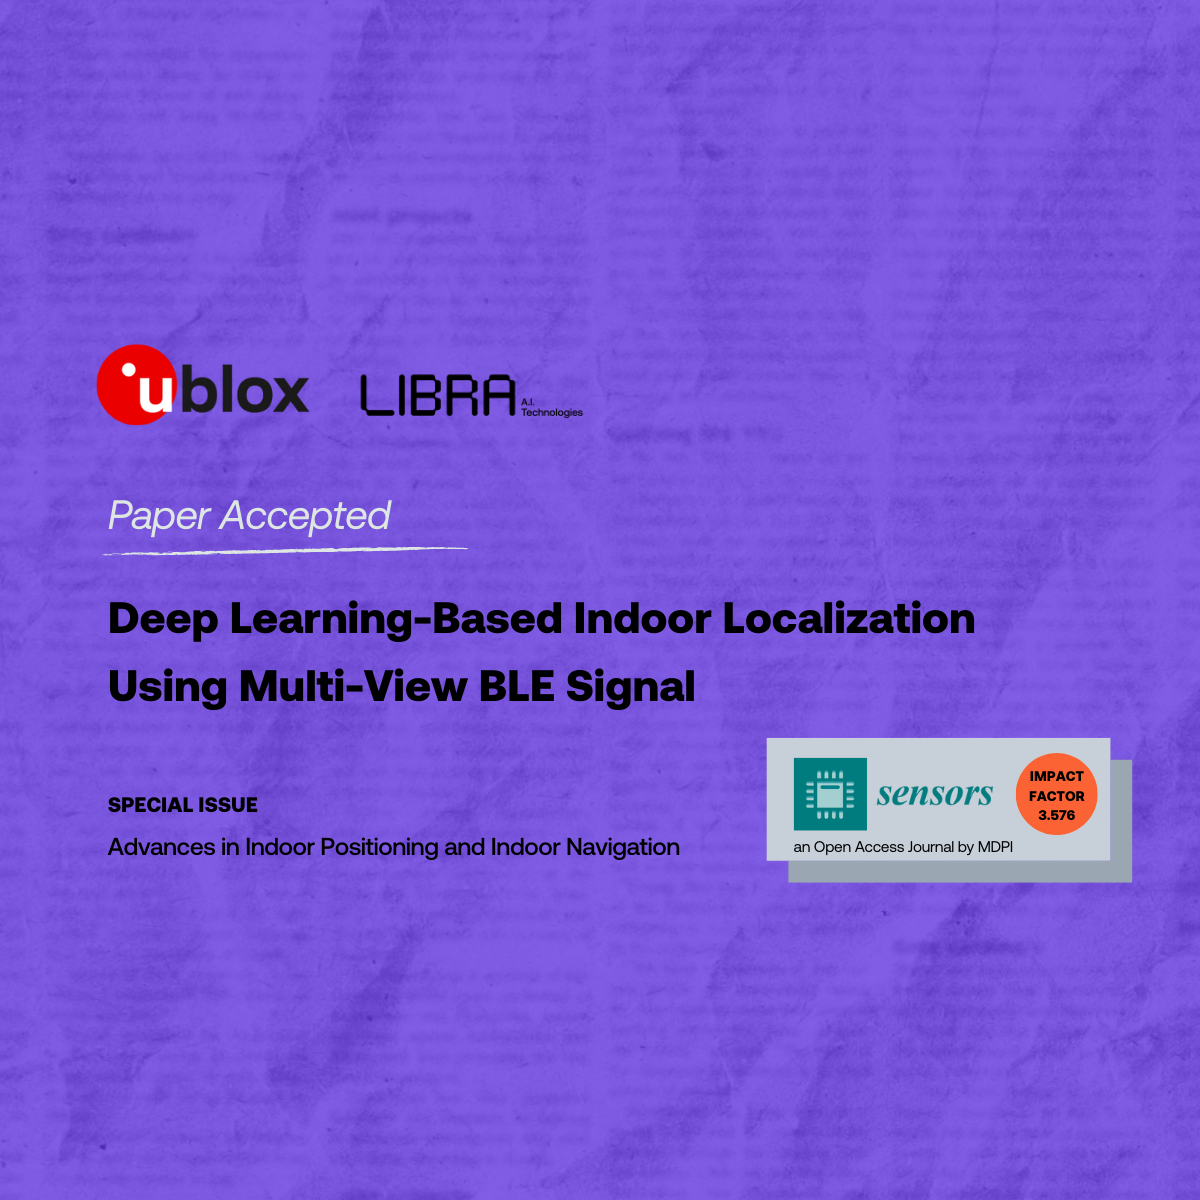 Deep Learning-Based Indoor Localization Using Multi-View BLE Signal